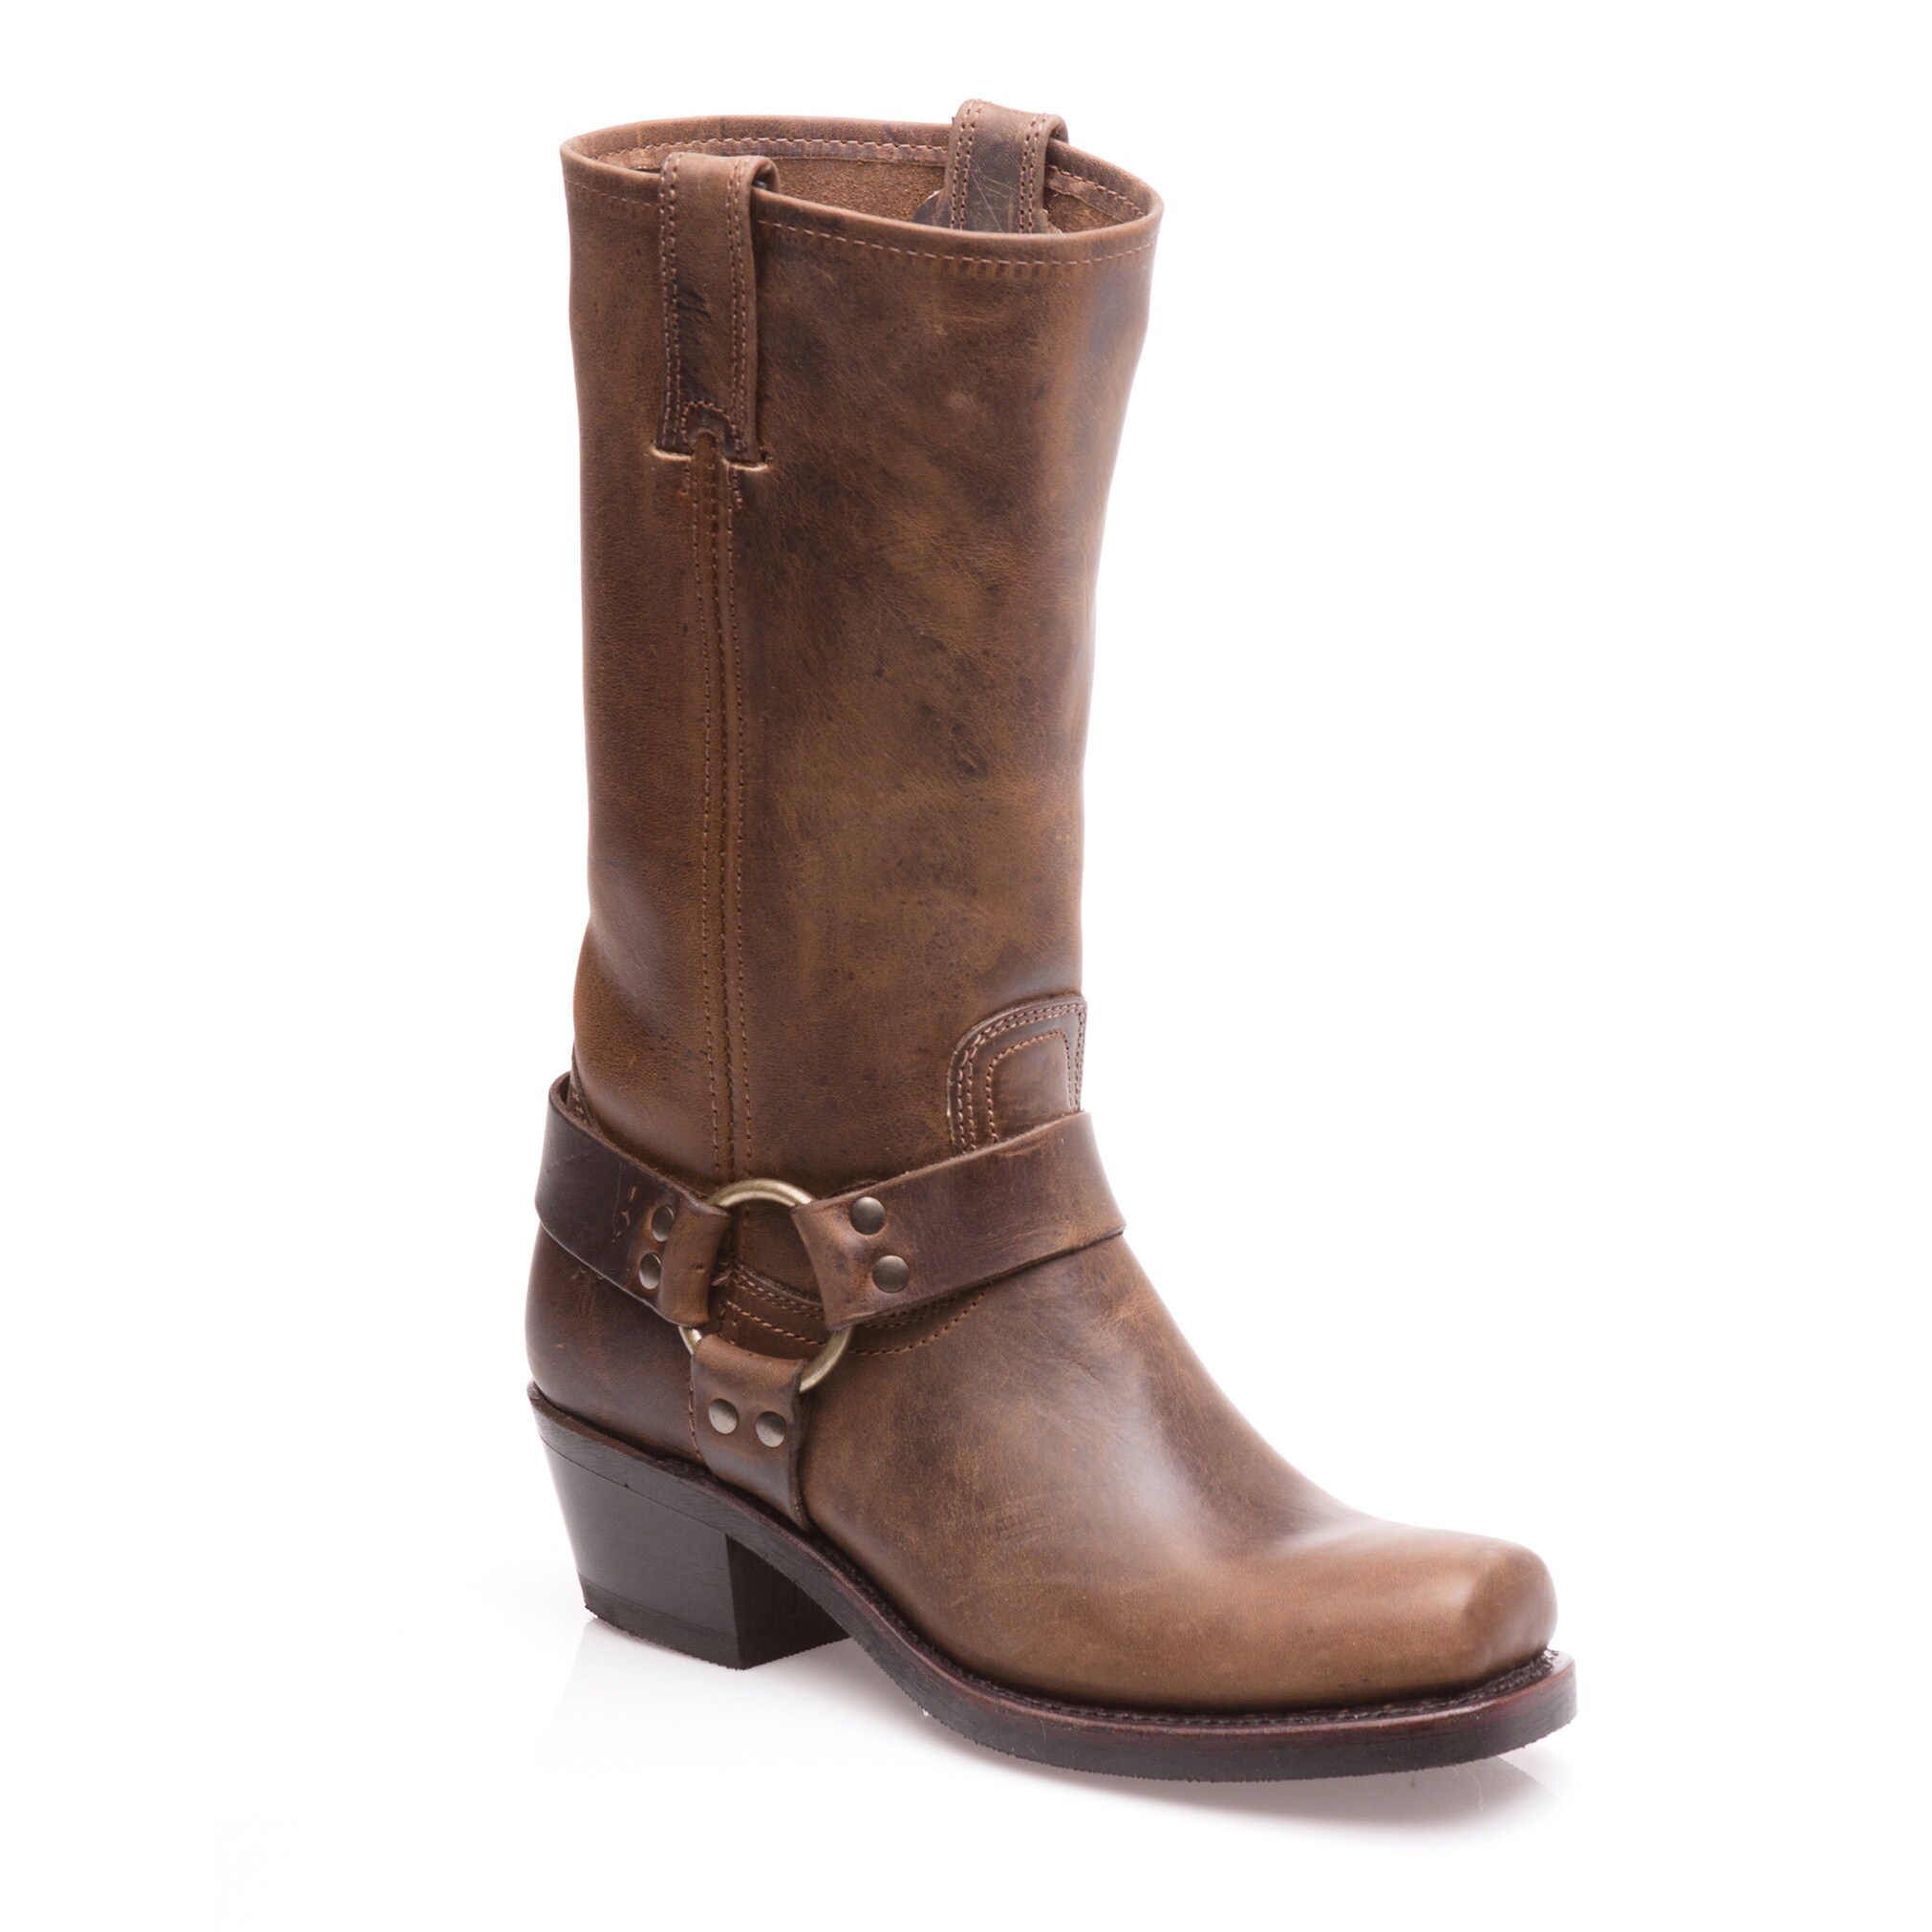 frye women's brown leather boots